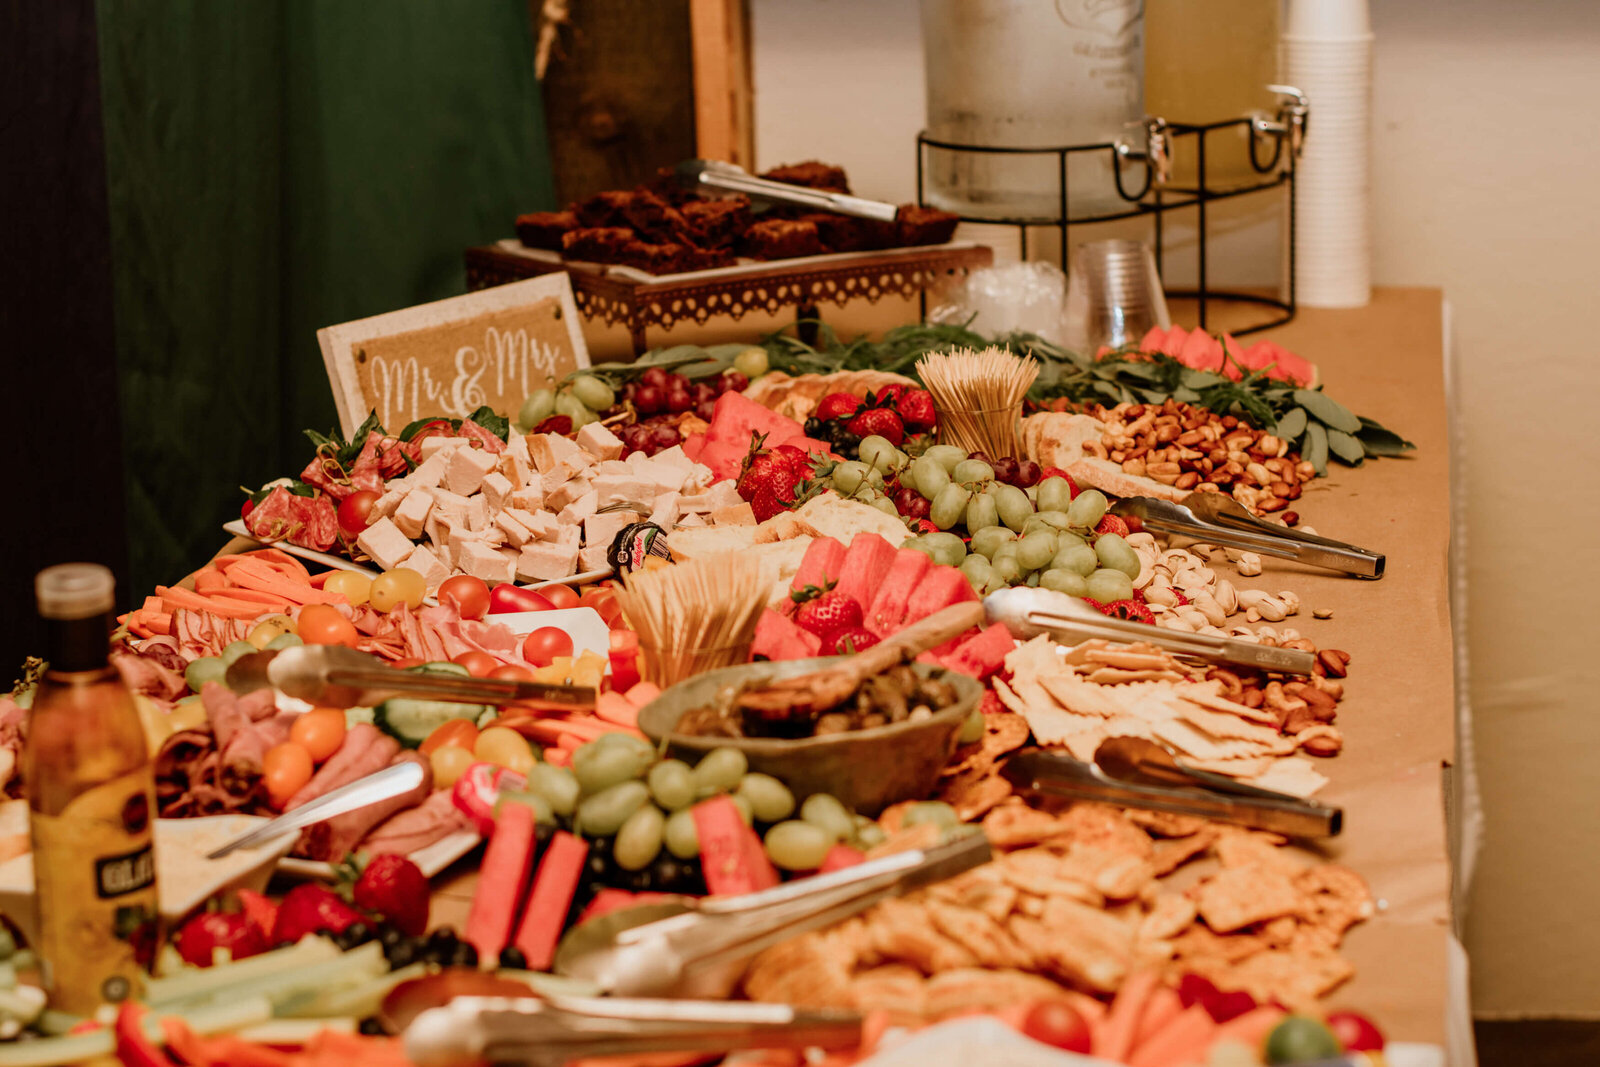 Grazing table at wedding reception.